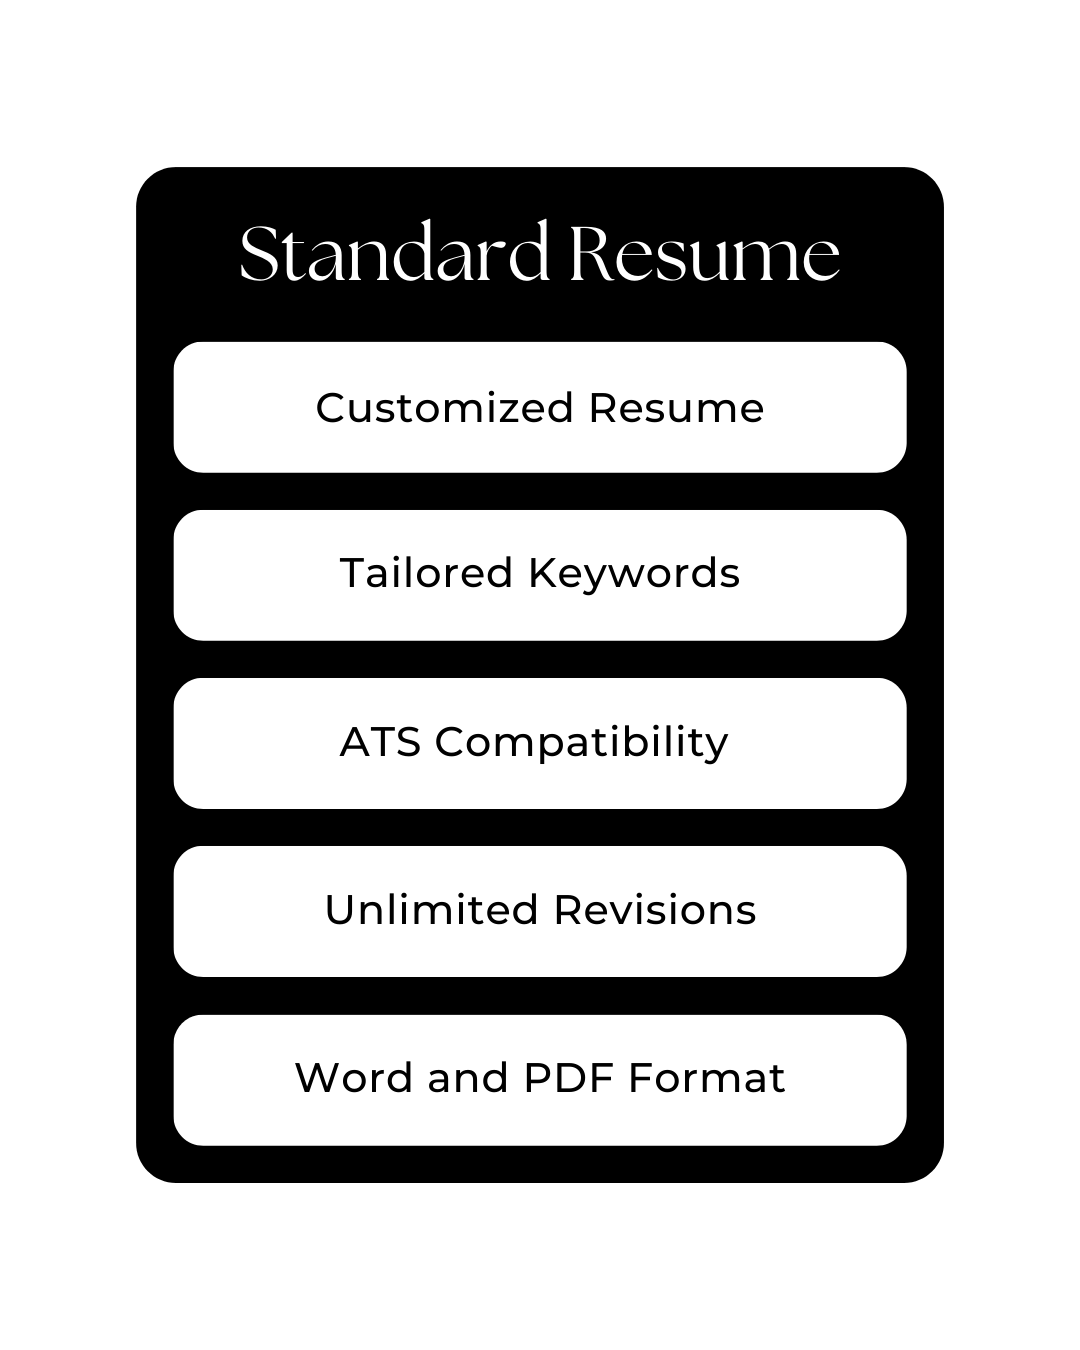 Standard Resume - 3 Business Day Delivery